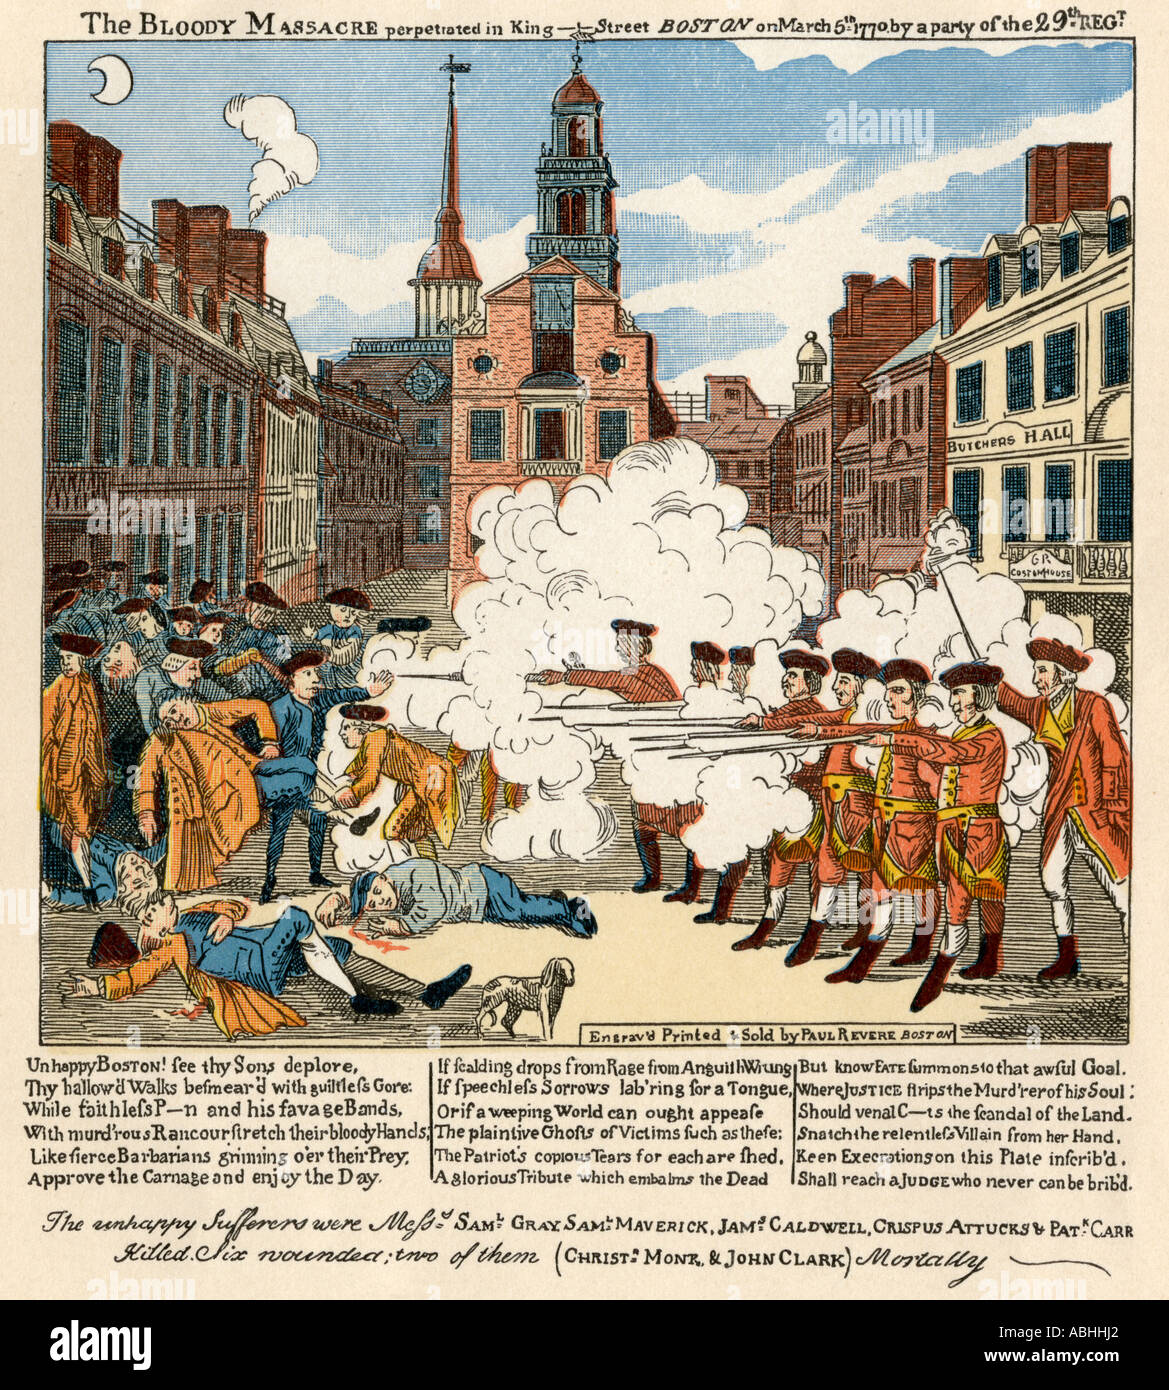 Paul Revere engraving of the Boston Massacre 1770 an event leading to the Revolutionary War. Color engraving Stock Photo